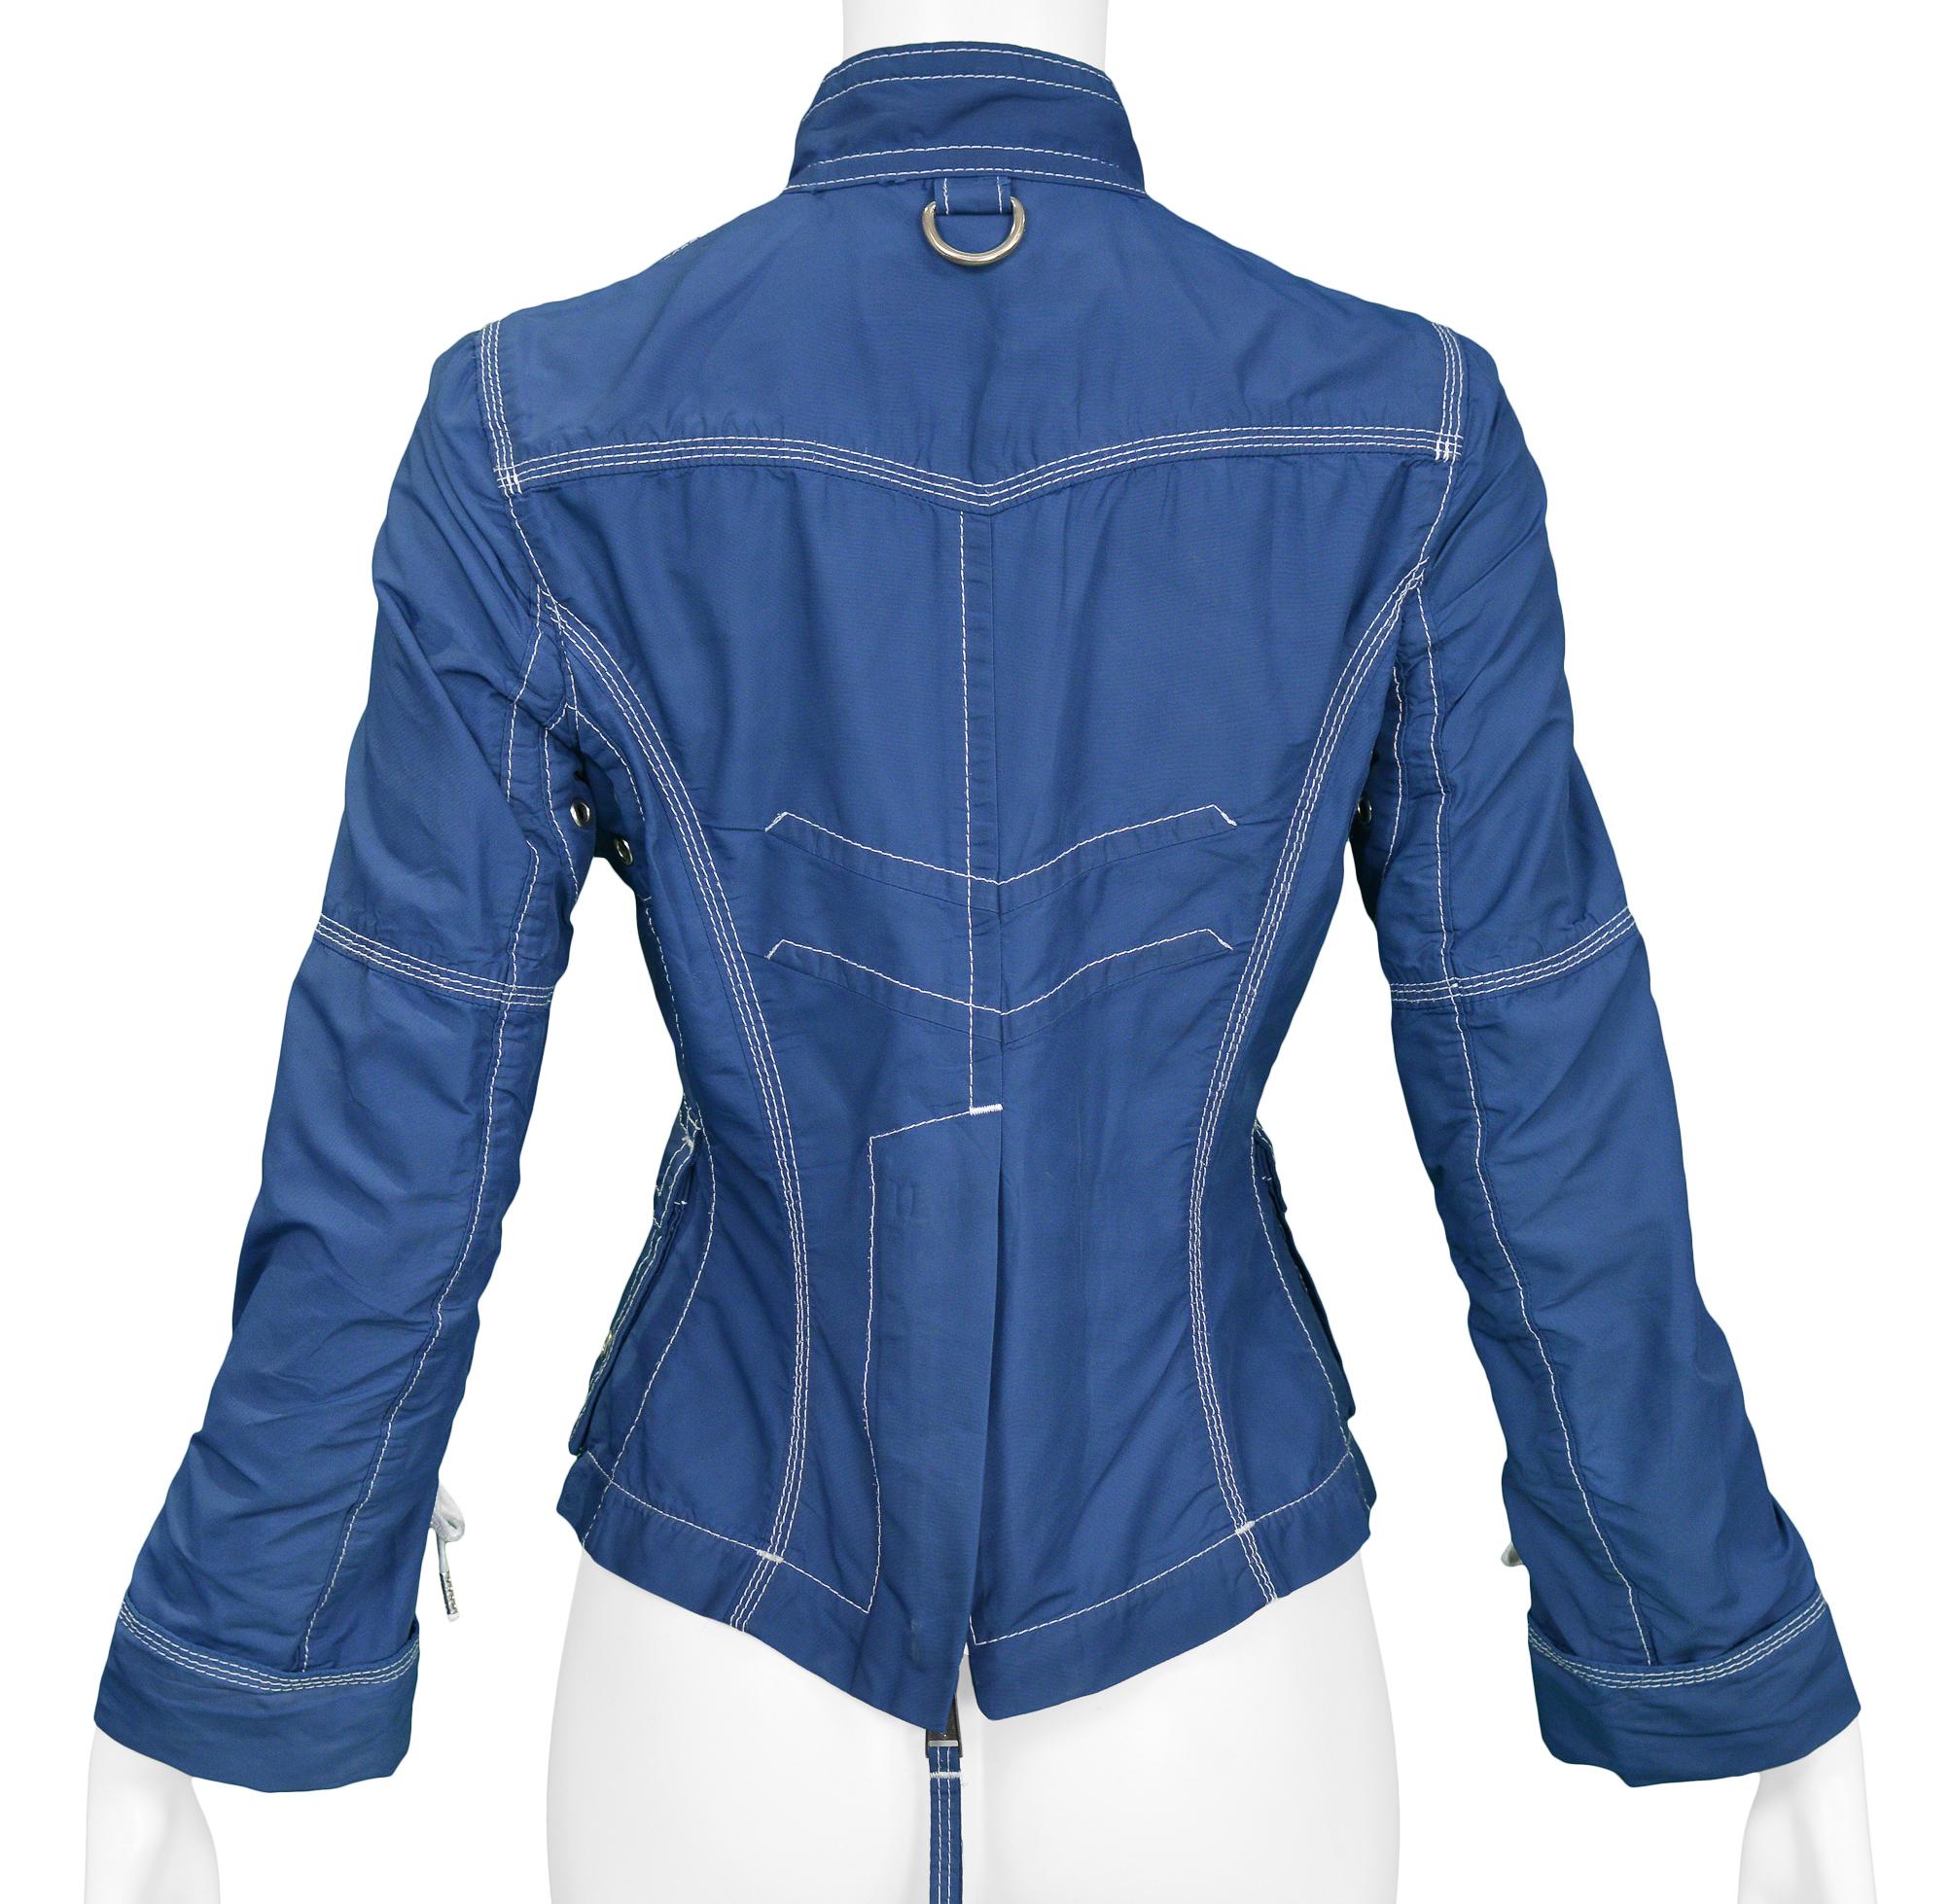 DSQUARED Blue & White Exposed Stitch Pocket Jacket In Excellent Condition For Sale In Los Angeles, CA